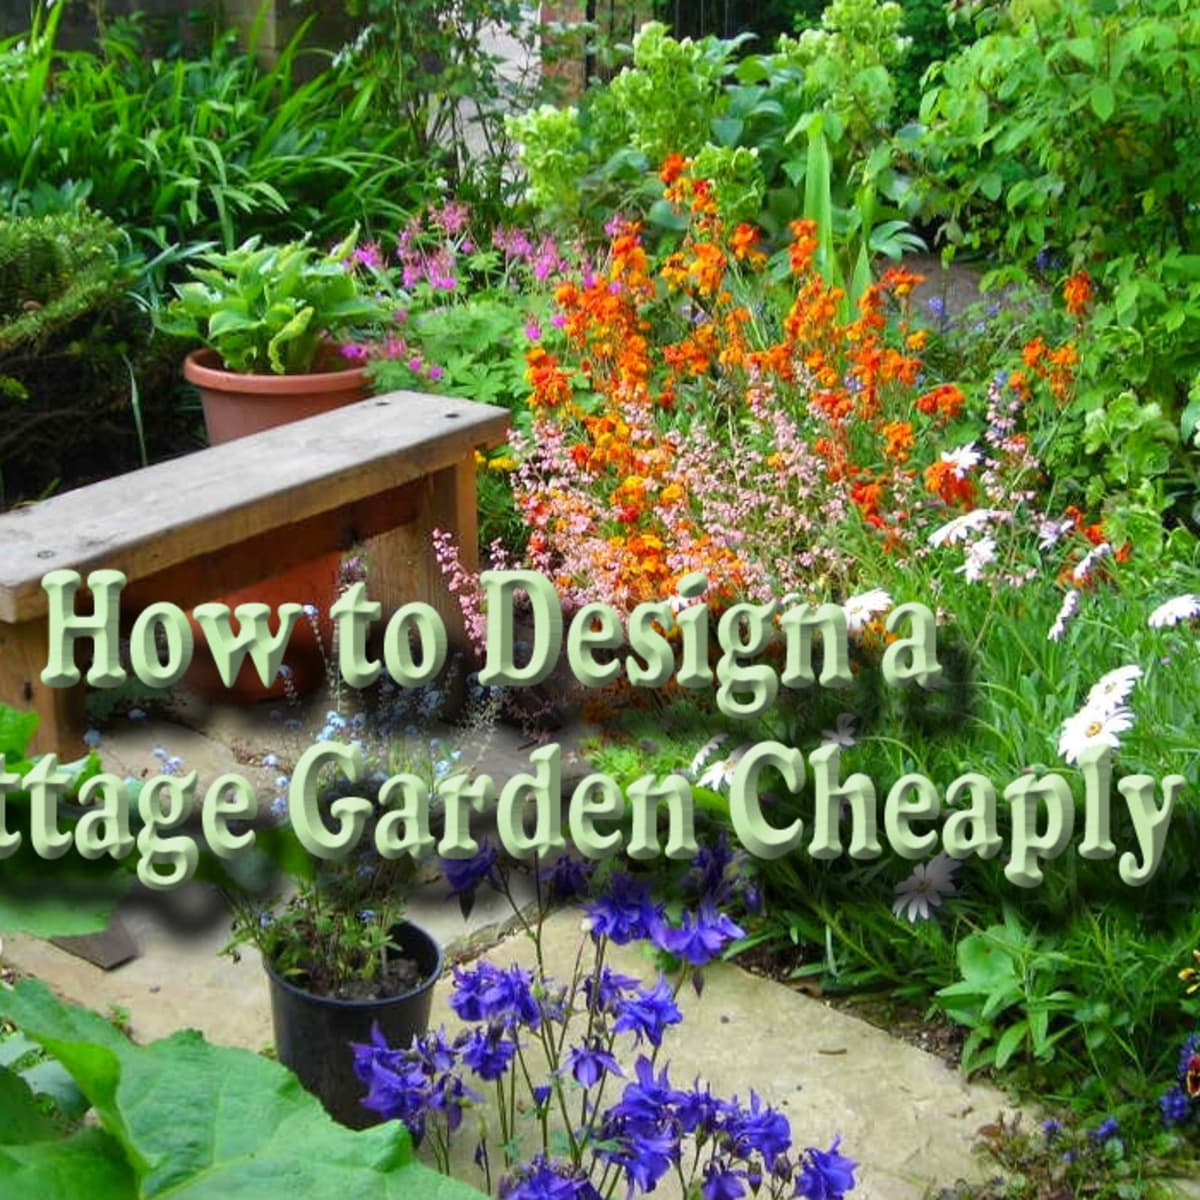 How to Design a Cottage Garden on a Budget   Dengarden